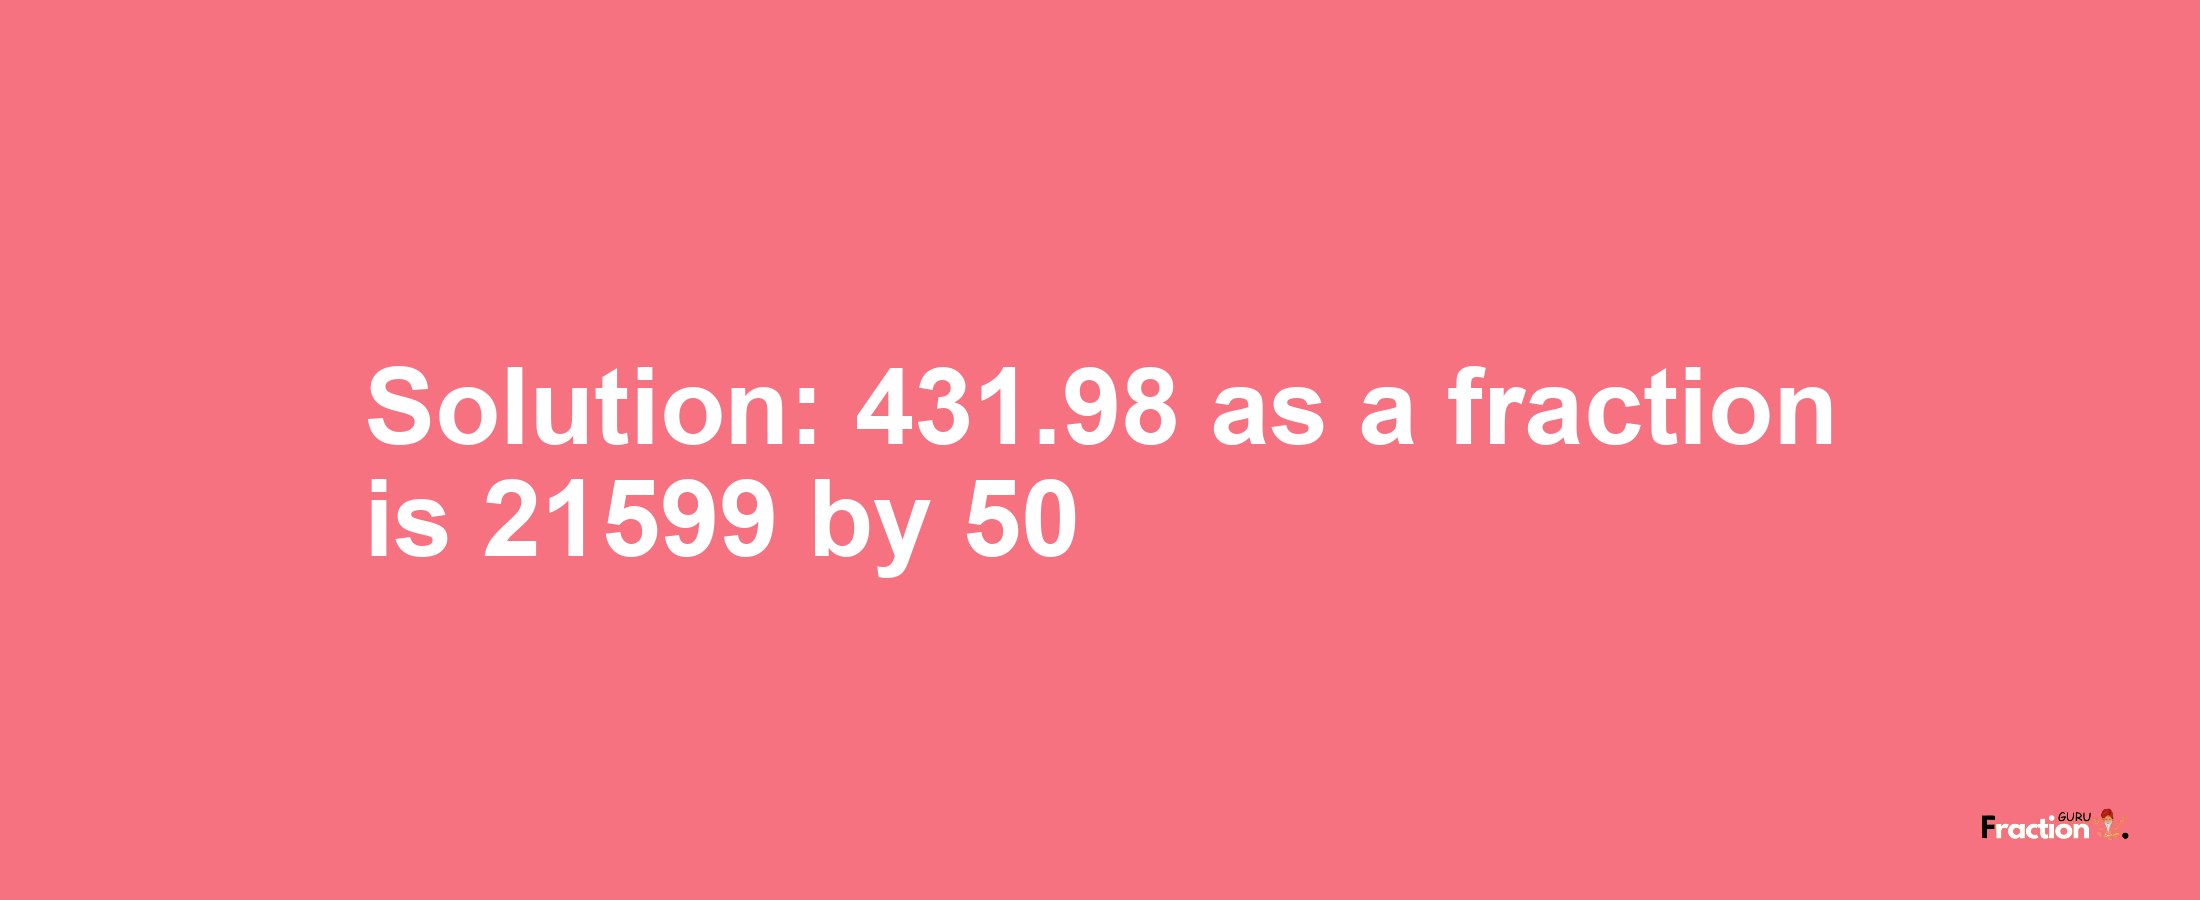 Solution:431.98 as a fraction is 21599/50